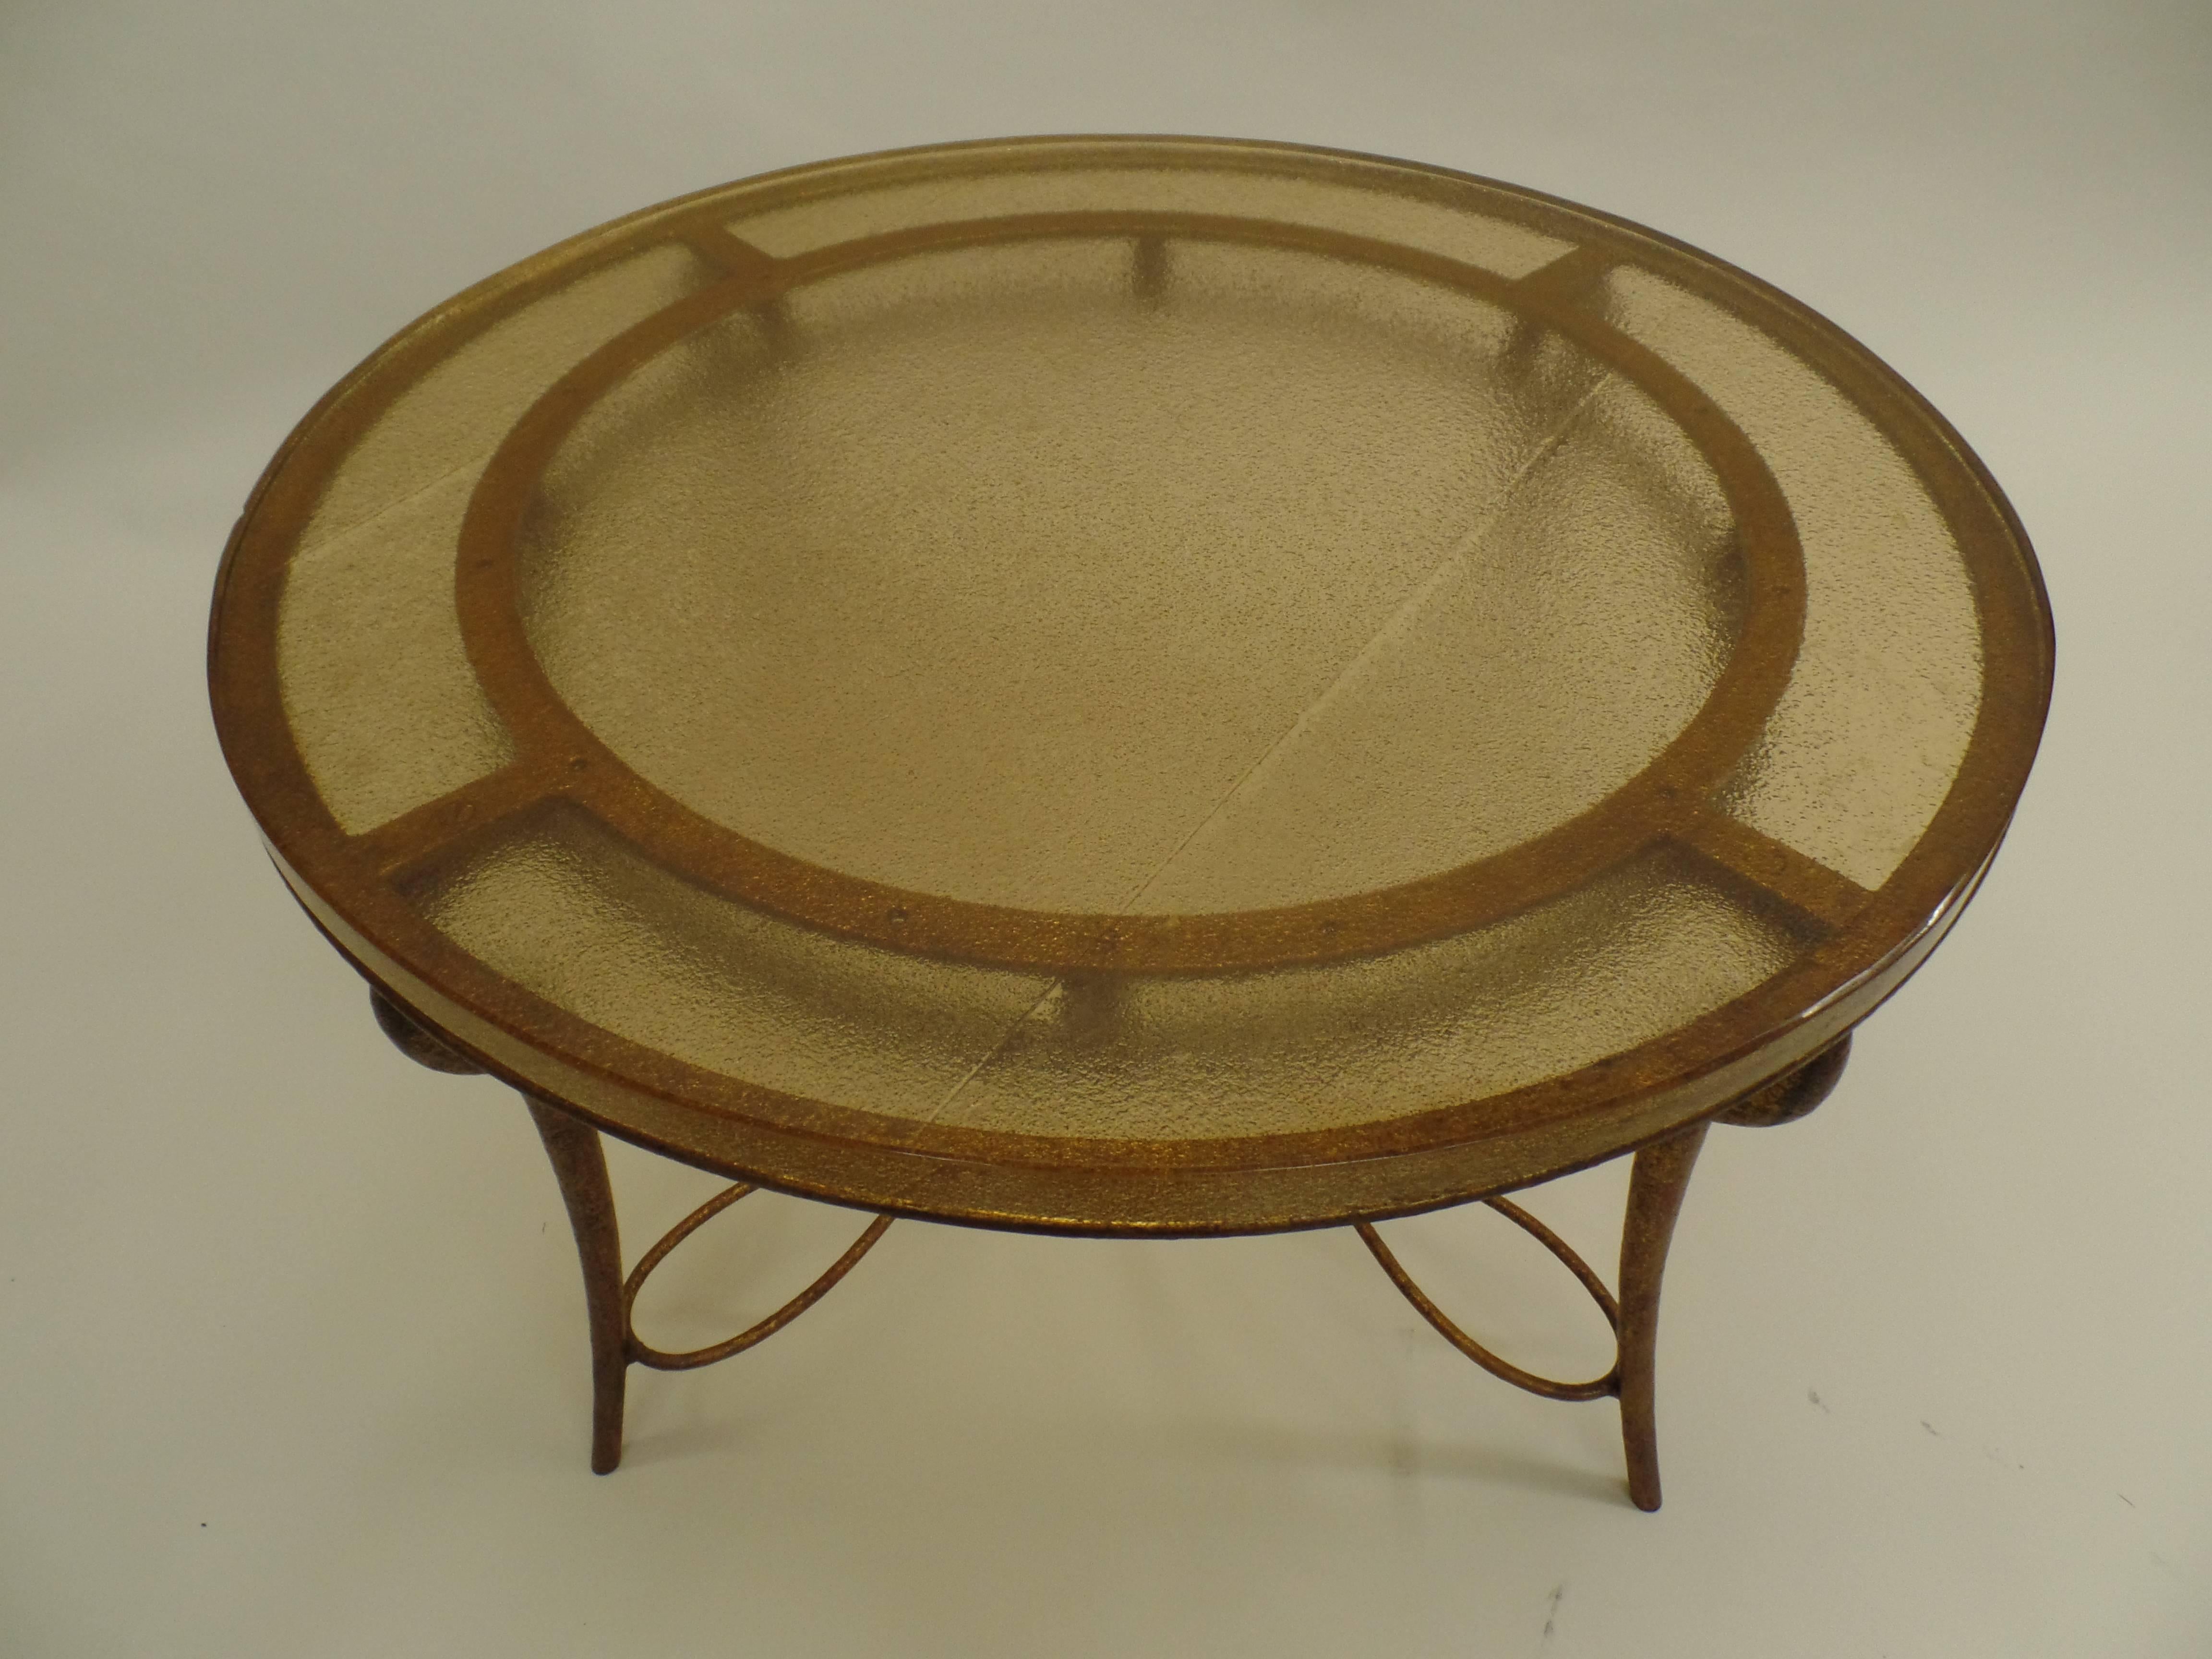 Elegant and chic coffee table in the Modern Neoclassical spirit by Rene Drouet in copper colored gilt wrought iron and a glass top in cream sand cast glass by Saint Gobain. A top French piece from the 1940s.